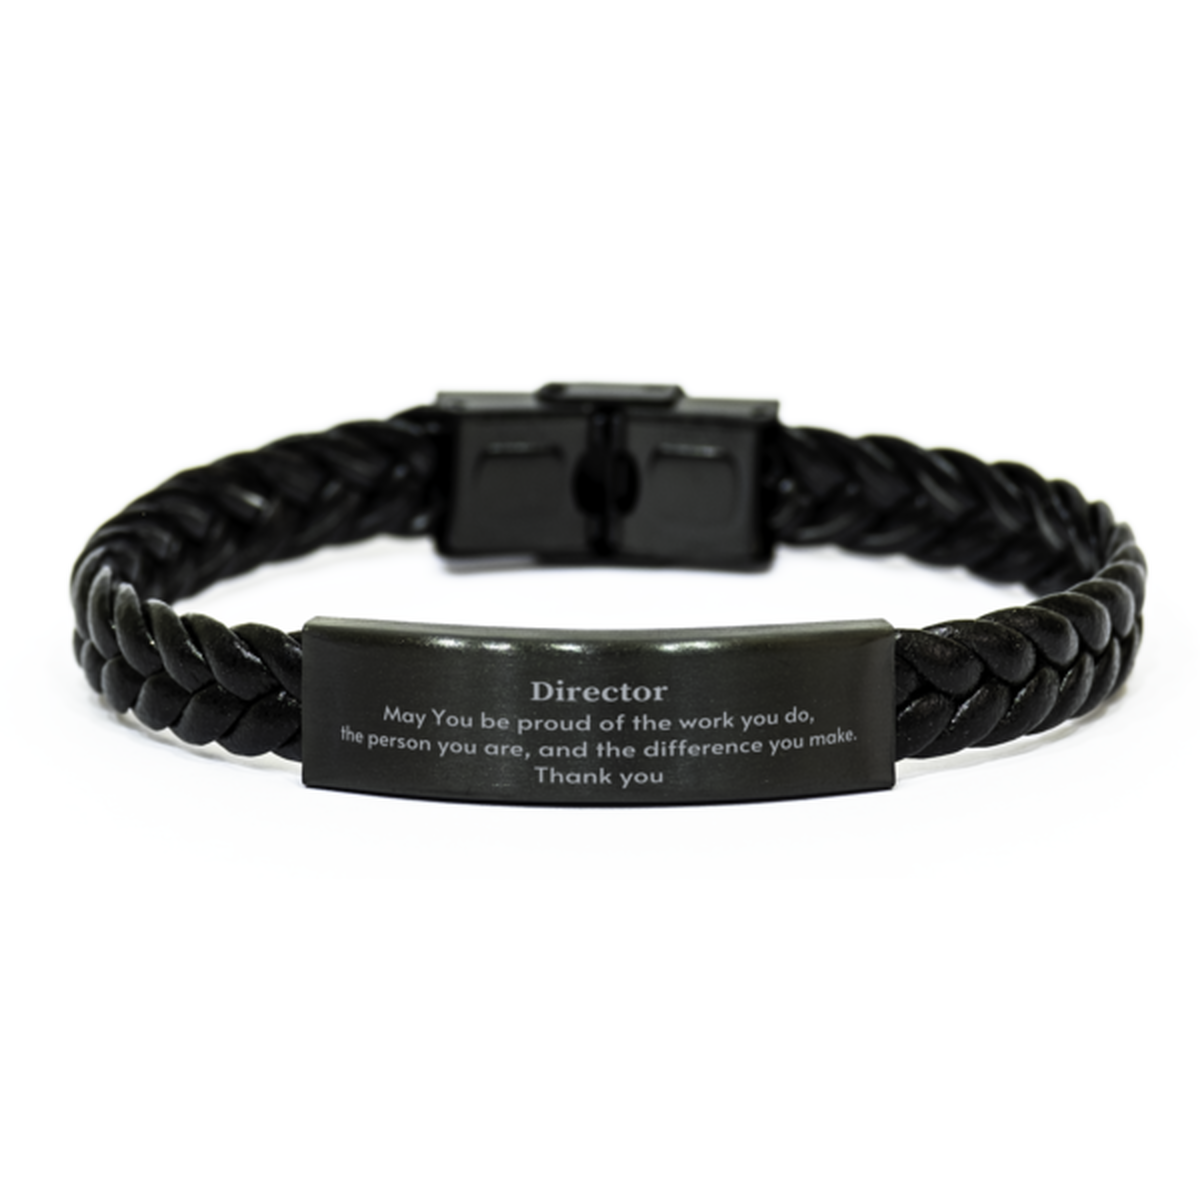 Heartwarming Braided Leather Bracelet Retirement Coworkers Gifts for Director, Director May You be proud of the work you do, the person you are Gifts for Boss Men Women Friends